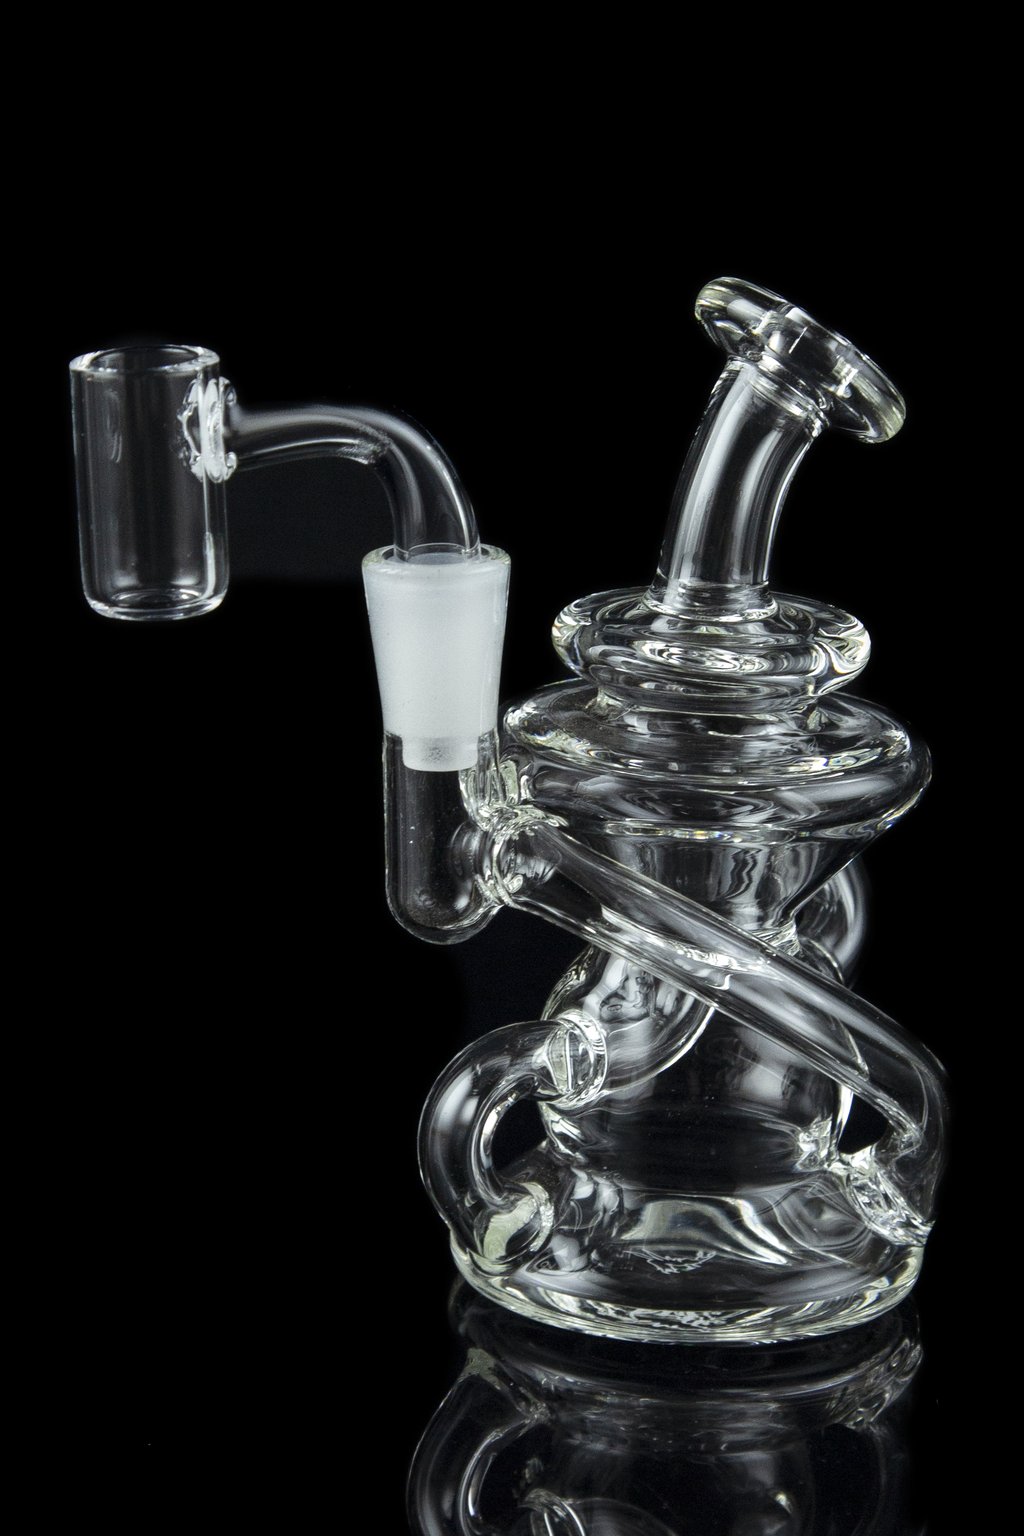 MJ Arsenal "Hydra" Mini Rig Recycler with Banger